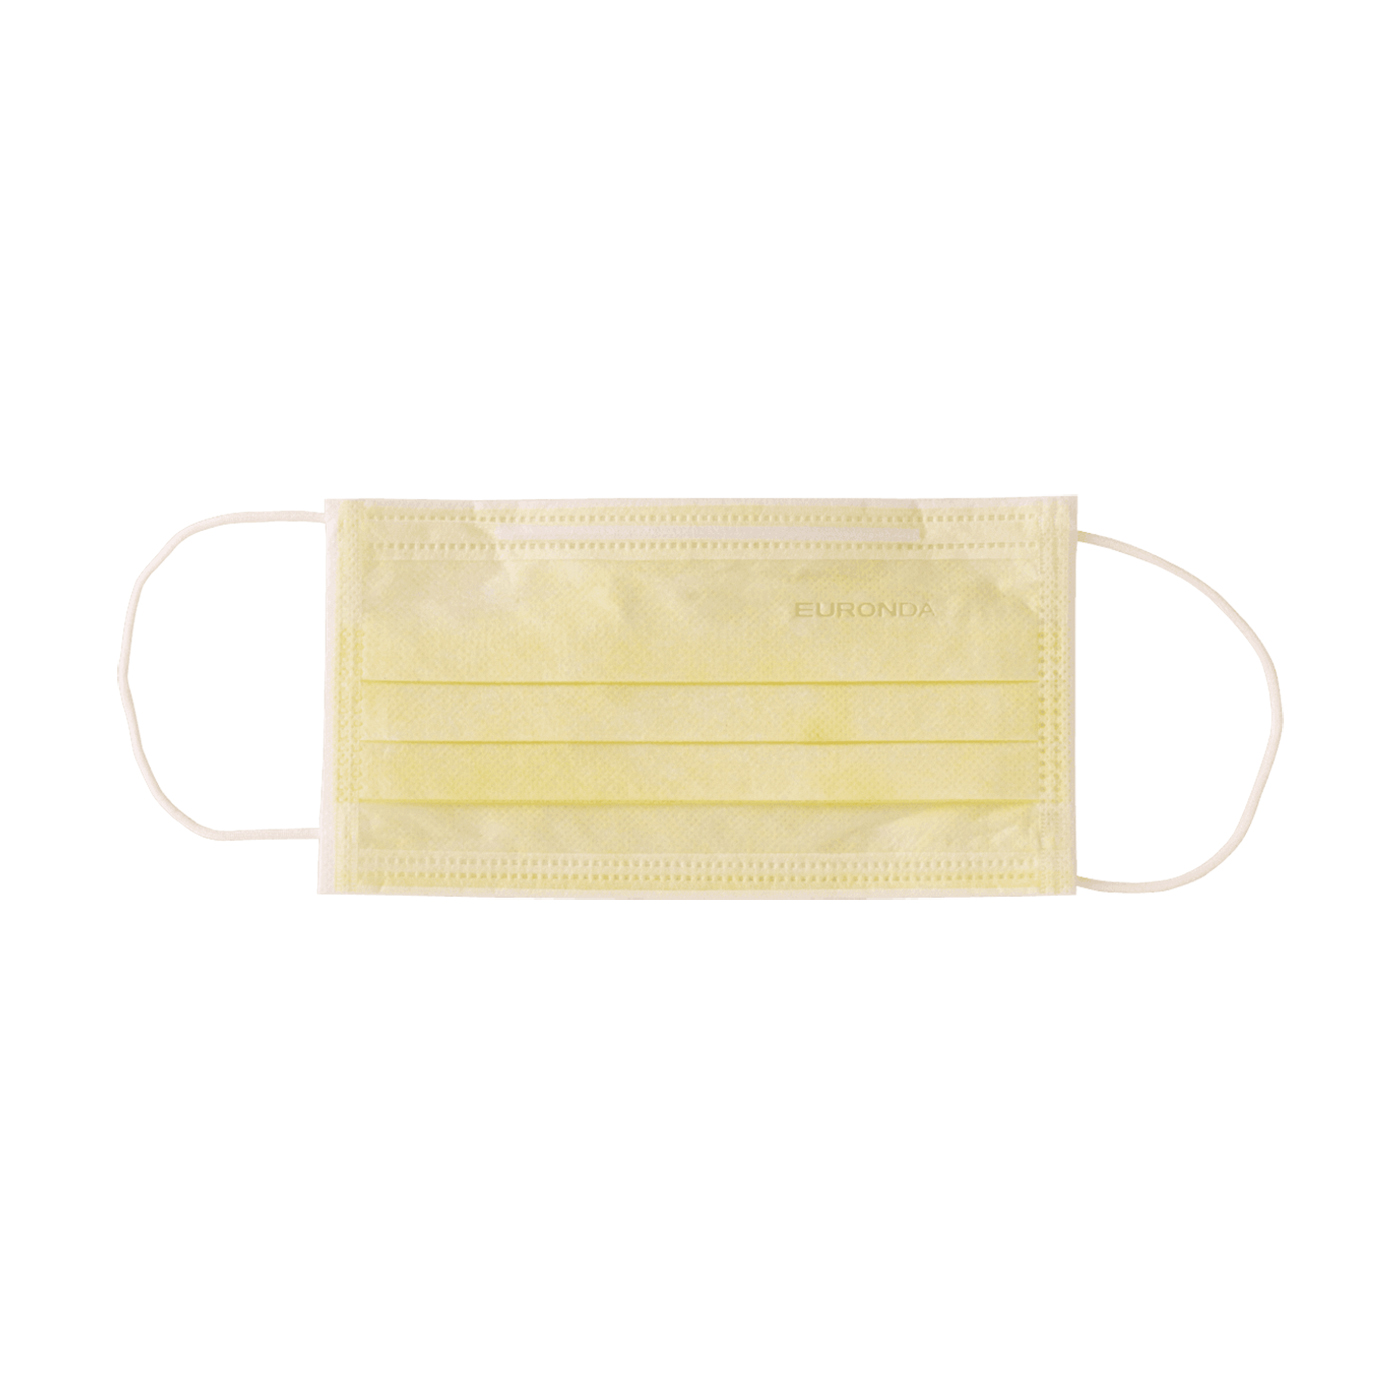 Monoart Protection 3 facemask, yellow - 50 pieces